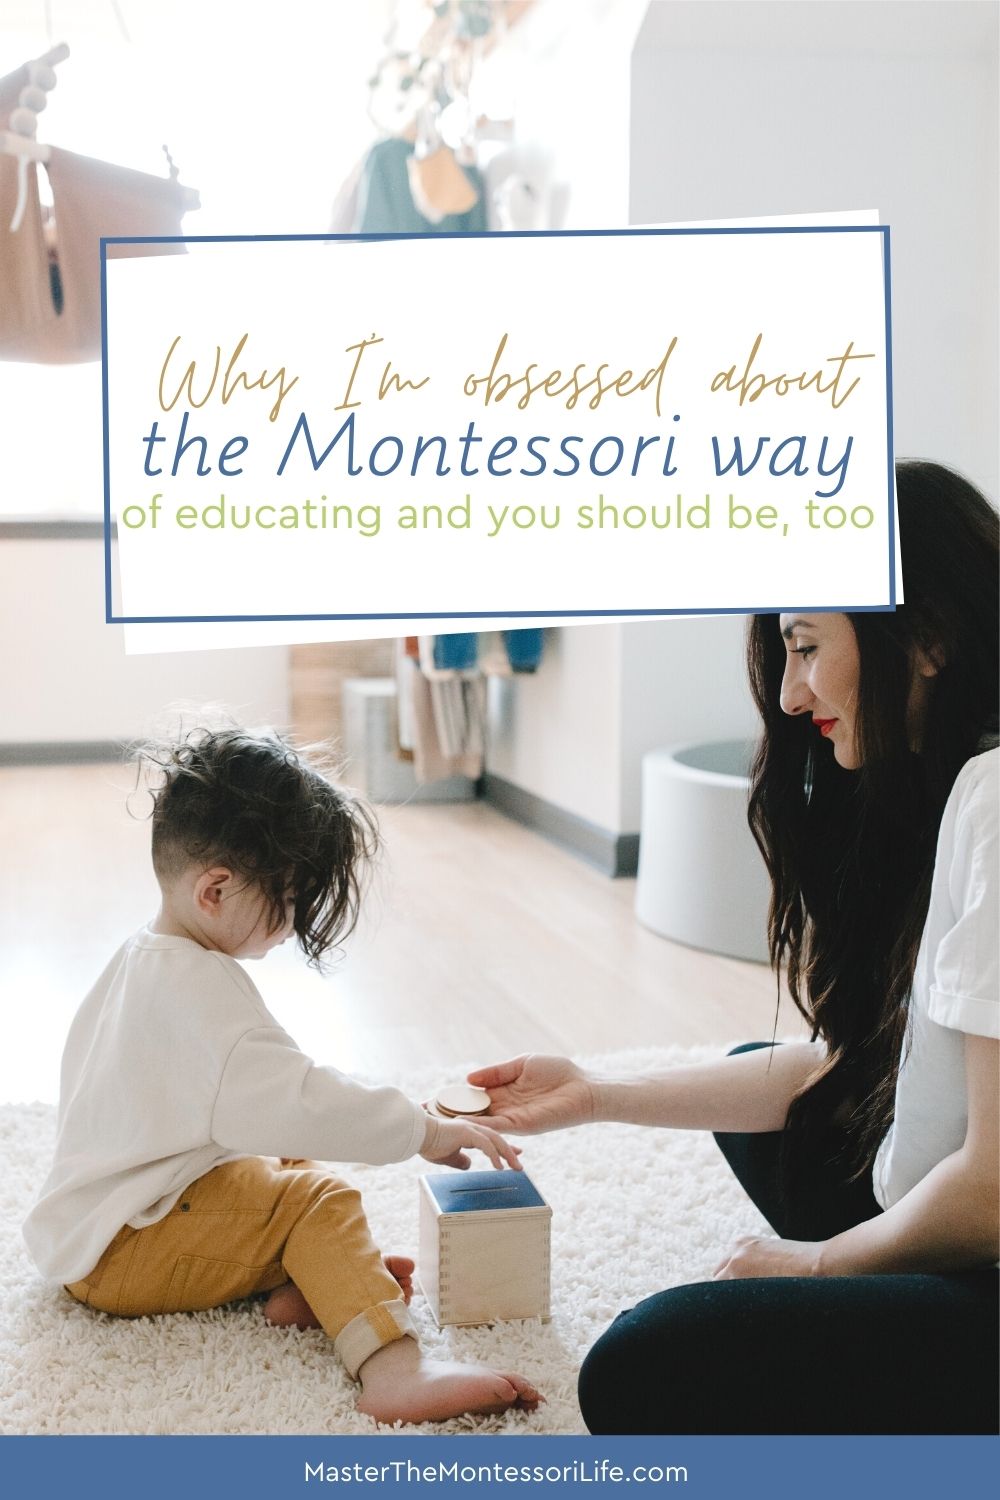 Why I’m obsessed about the Montessori way of educating